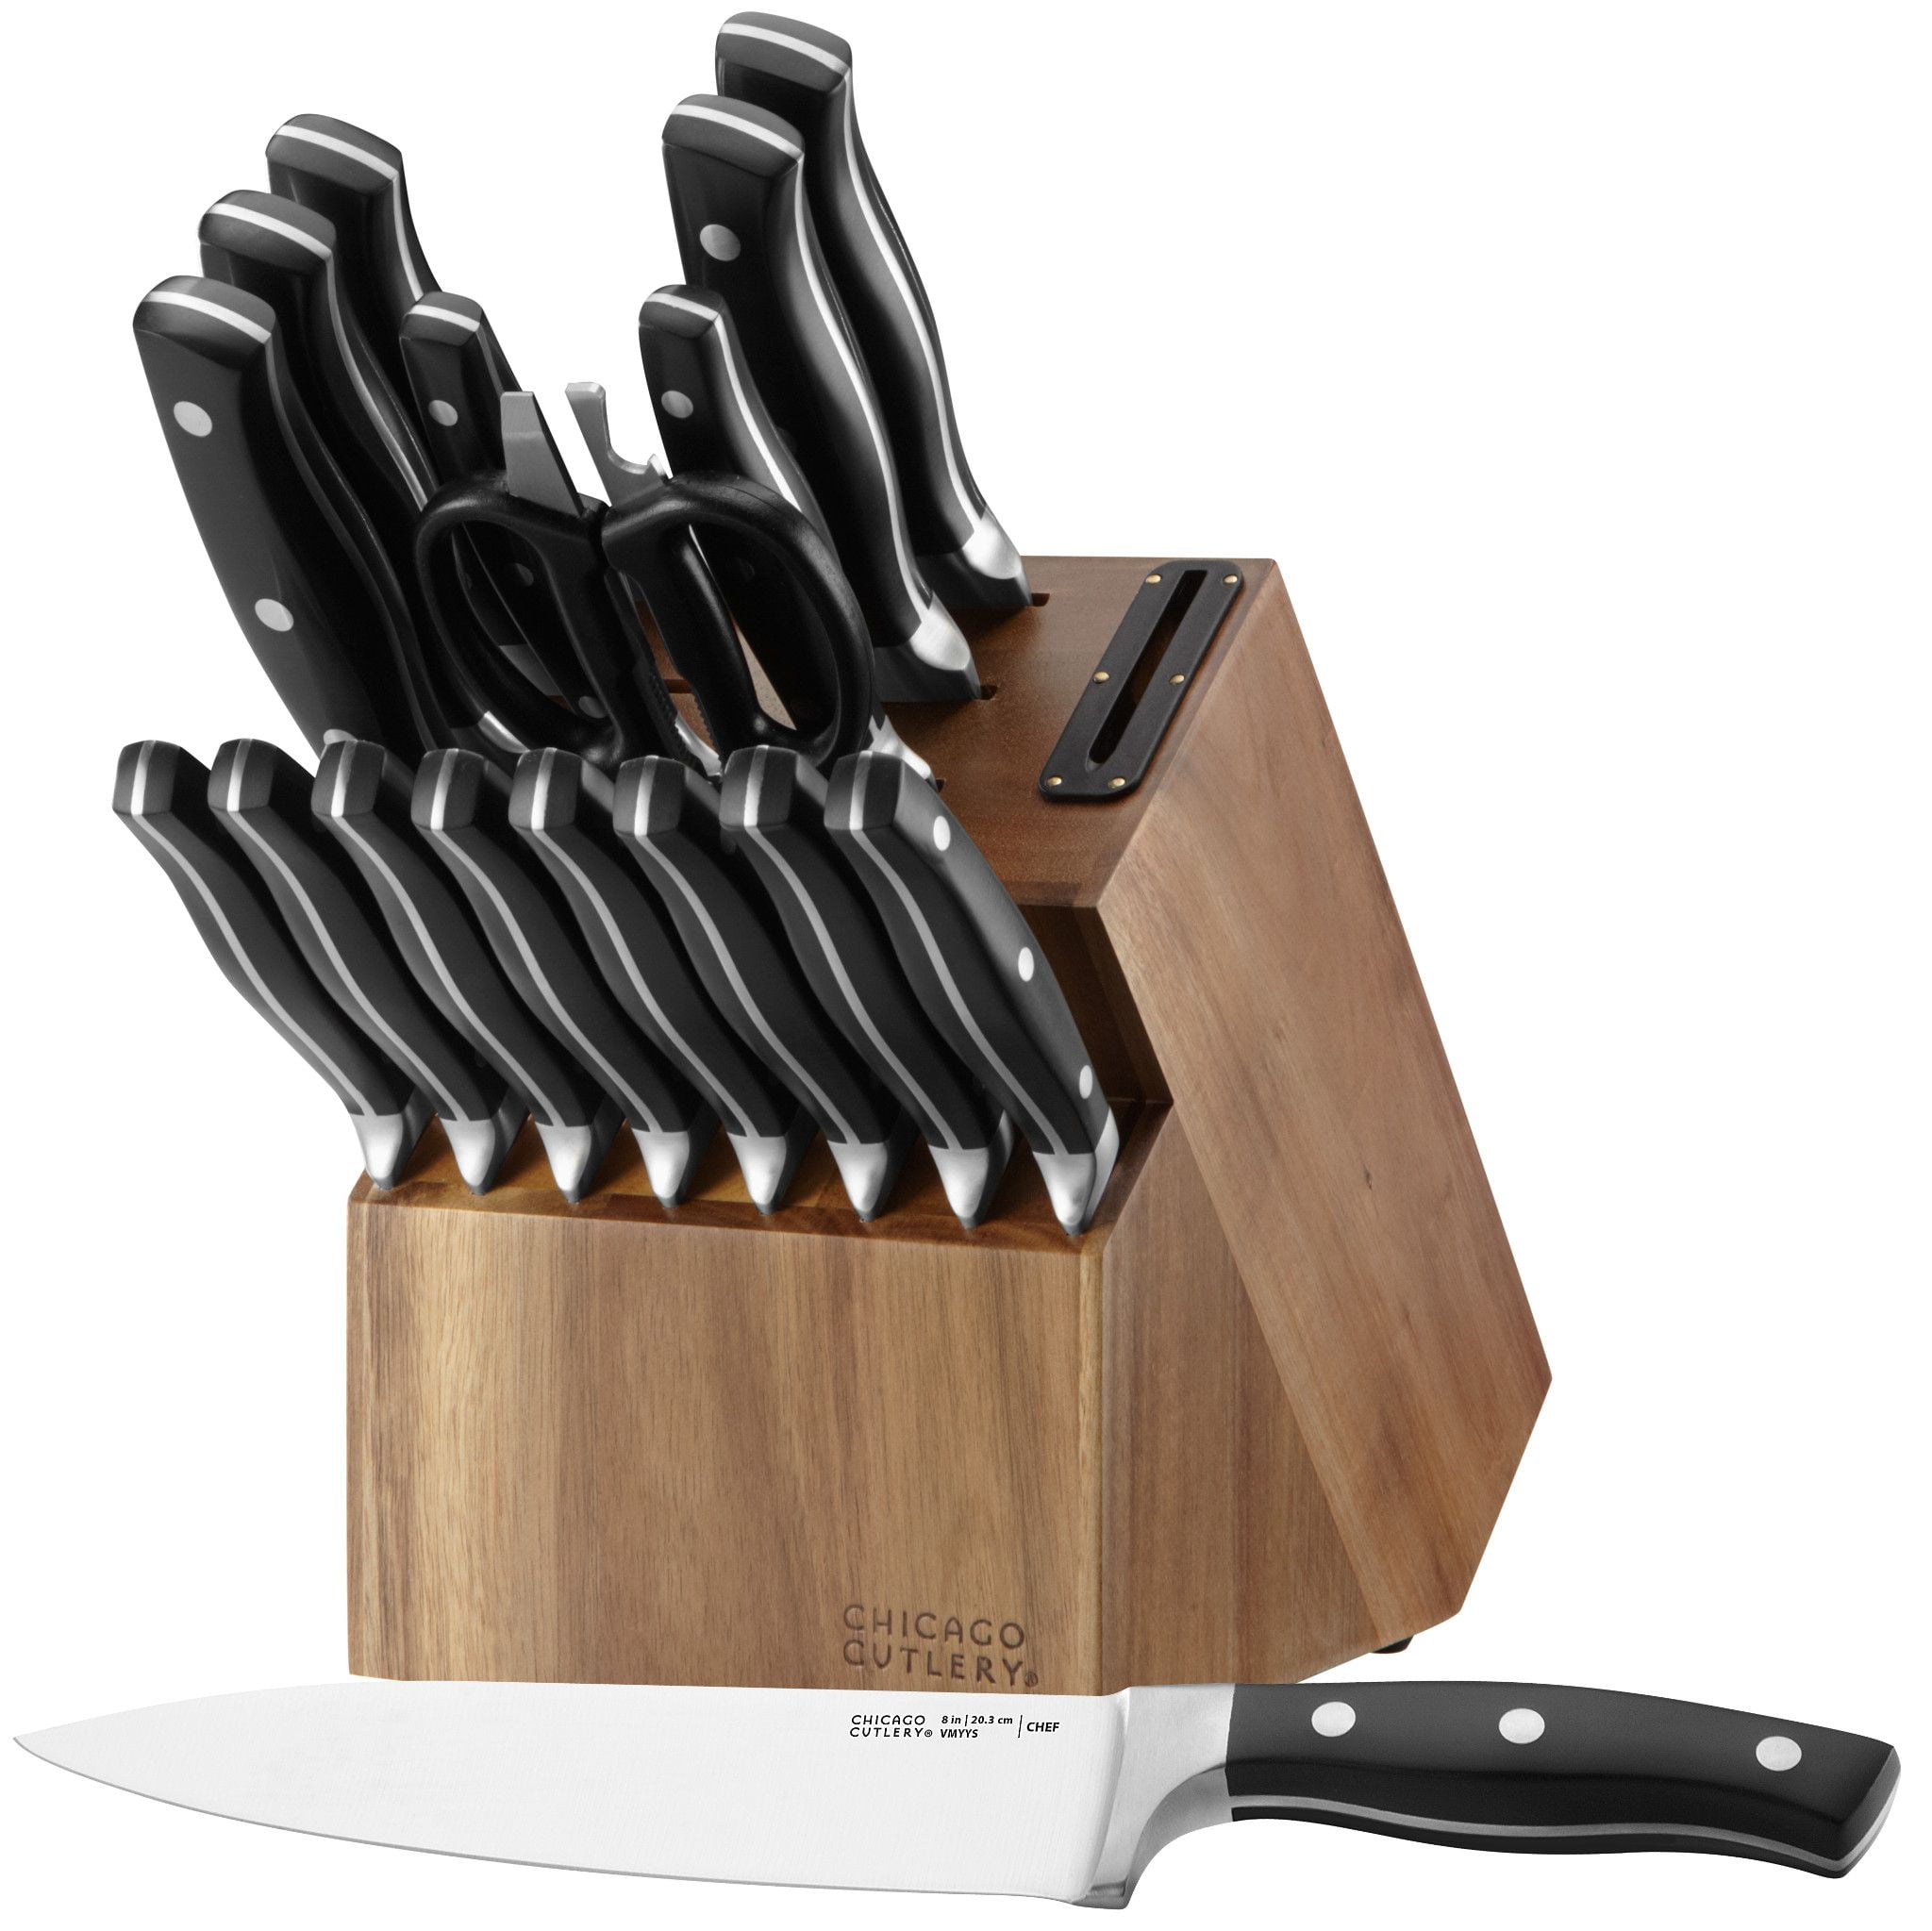 Chicago Cutlery Insignia Classic 18-piece Block Set with Built-in Sharpener